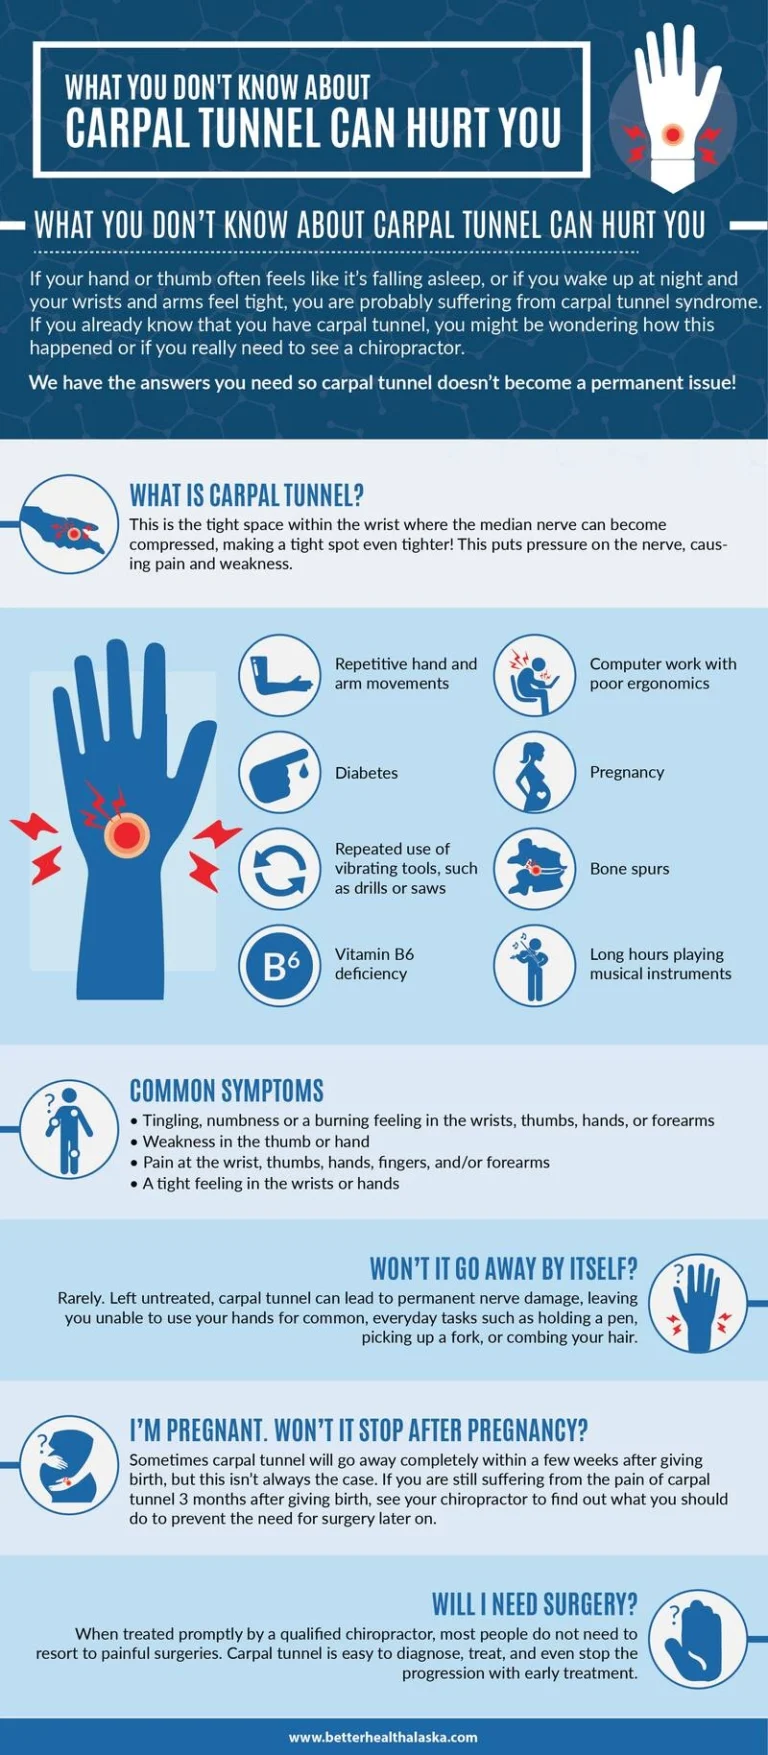 An infographic about carpal tunnel syndrome.